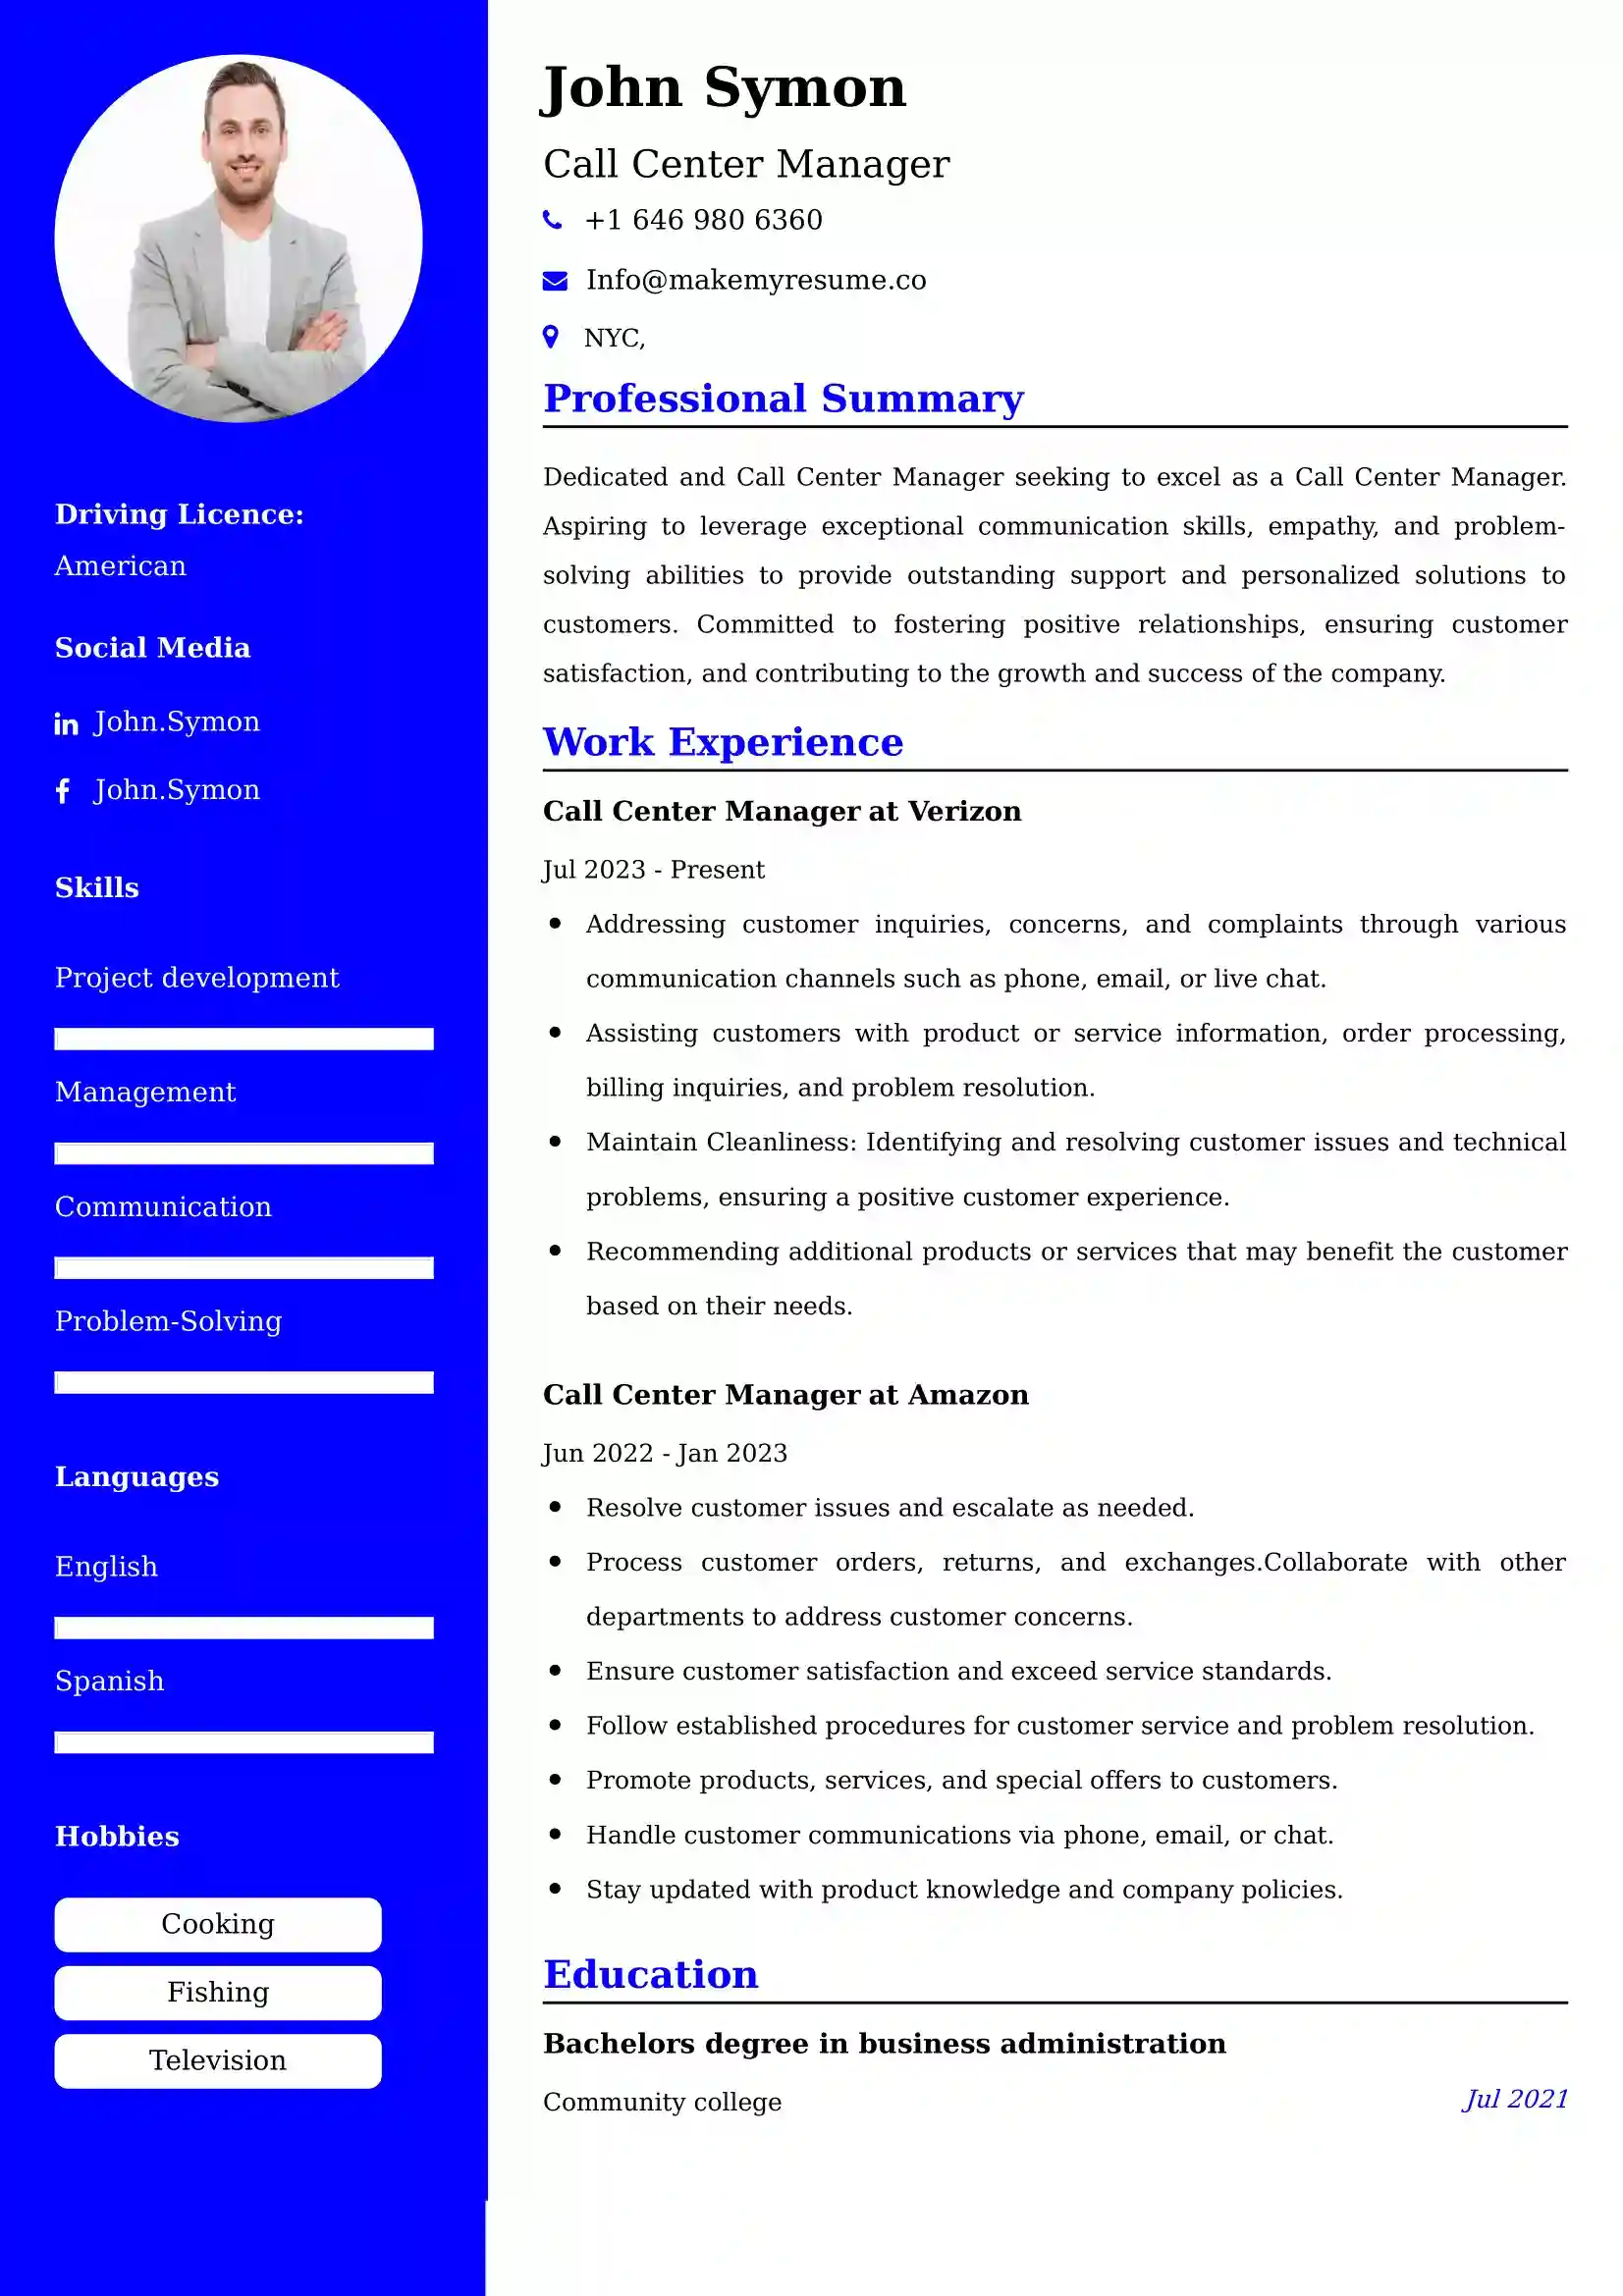 Call Center Manager Resume Examples - UK Format, Latest Template.